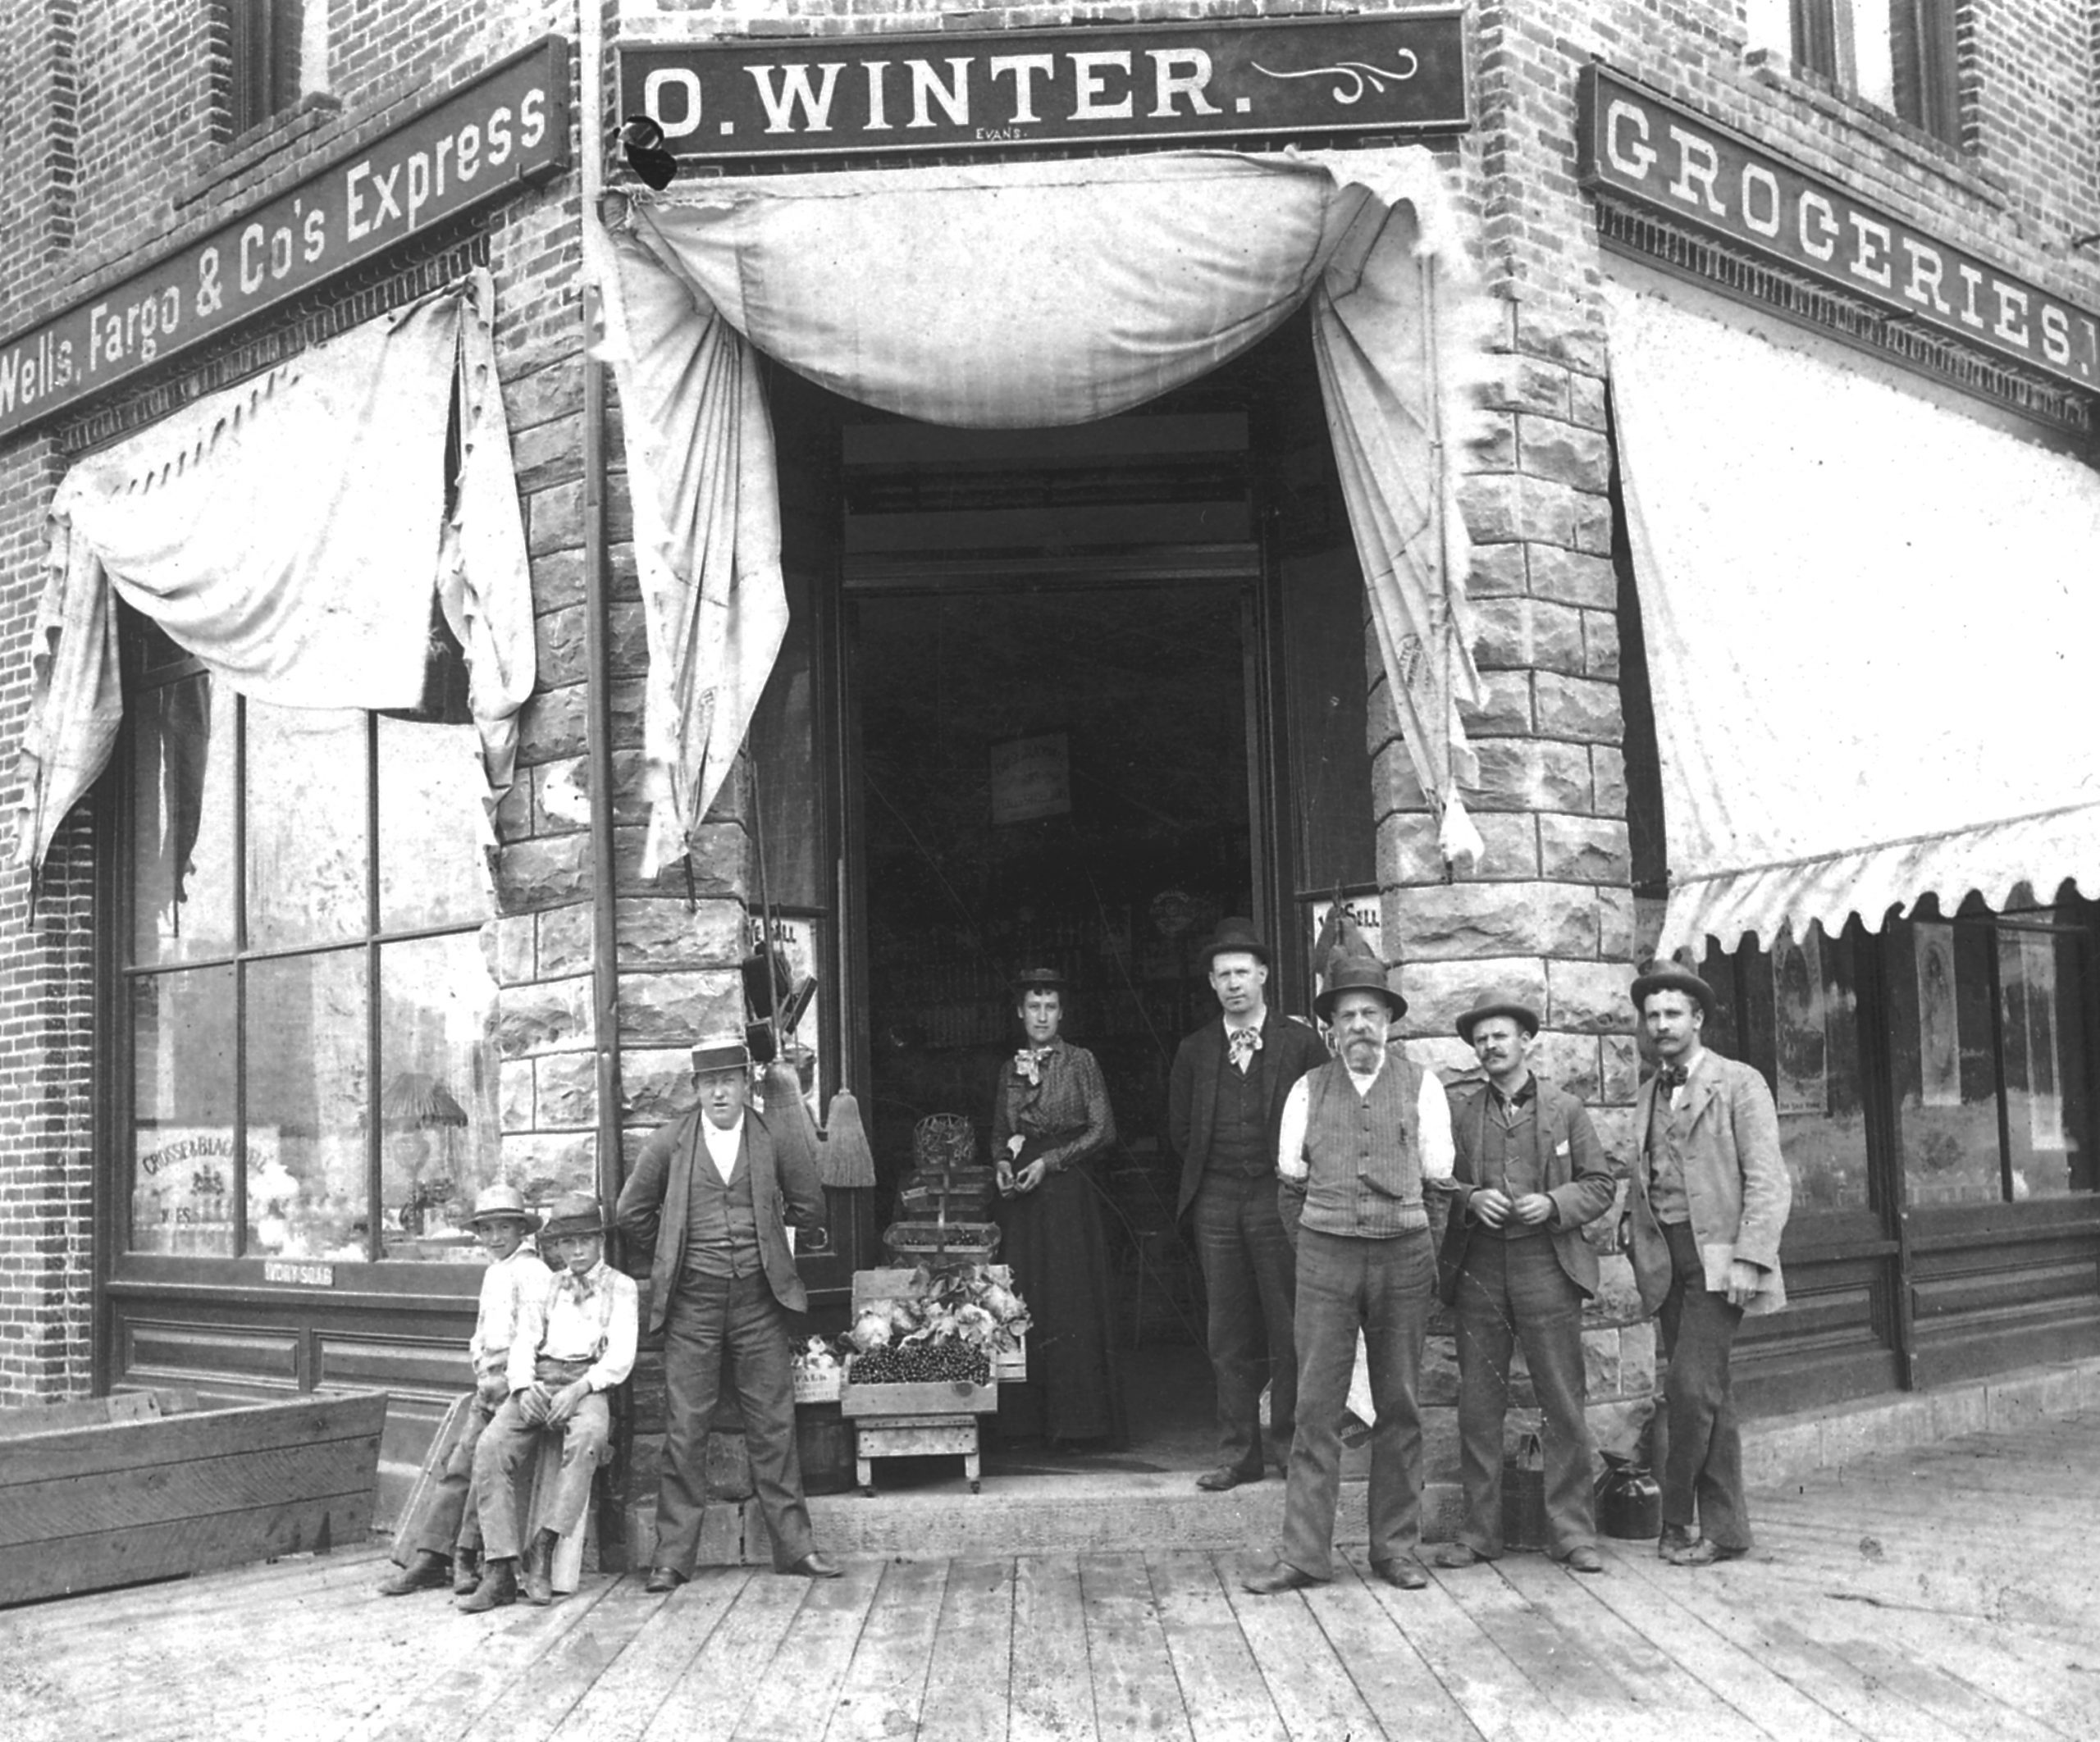 Group of people gather before the open doors of a store. A woman stands in the doorway.